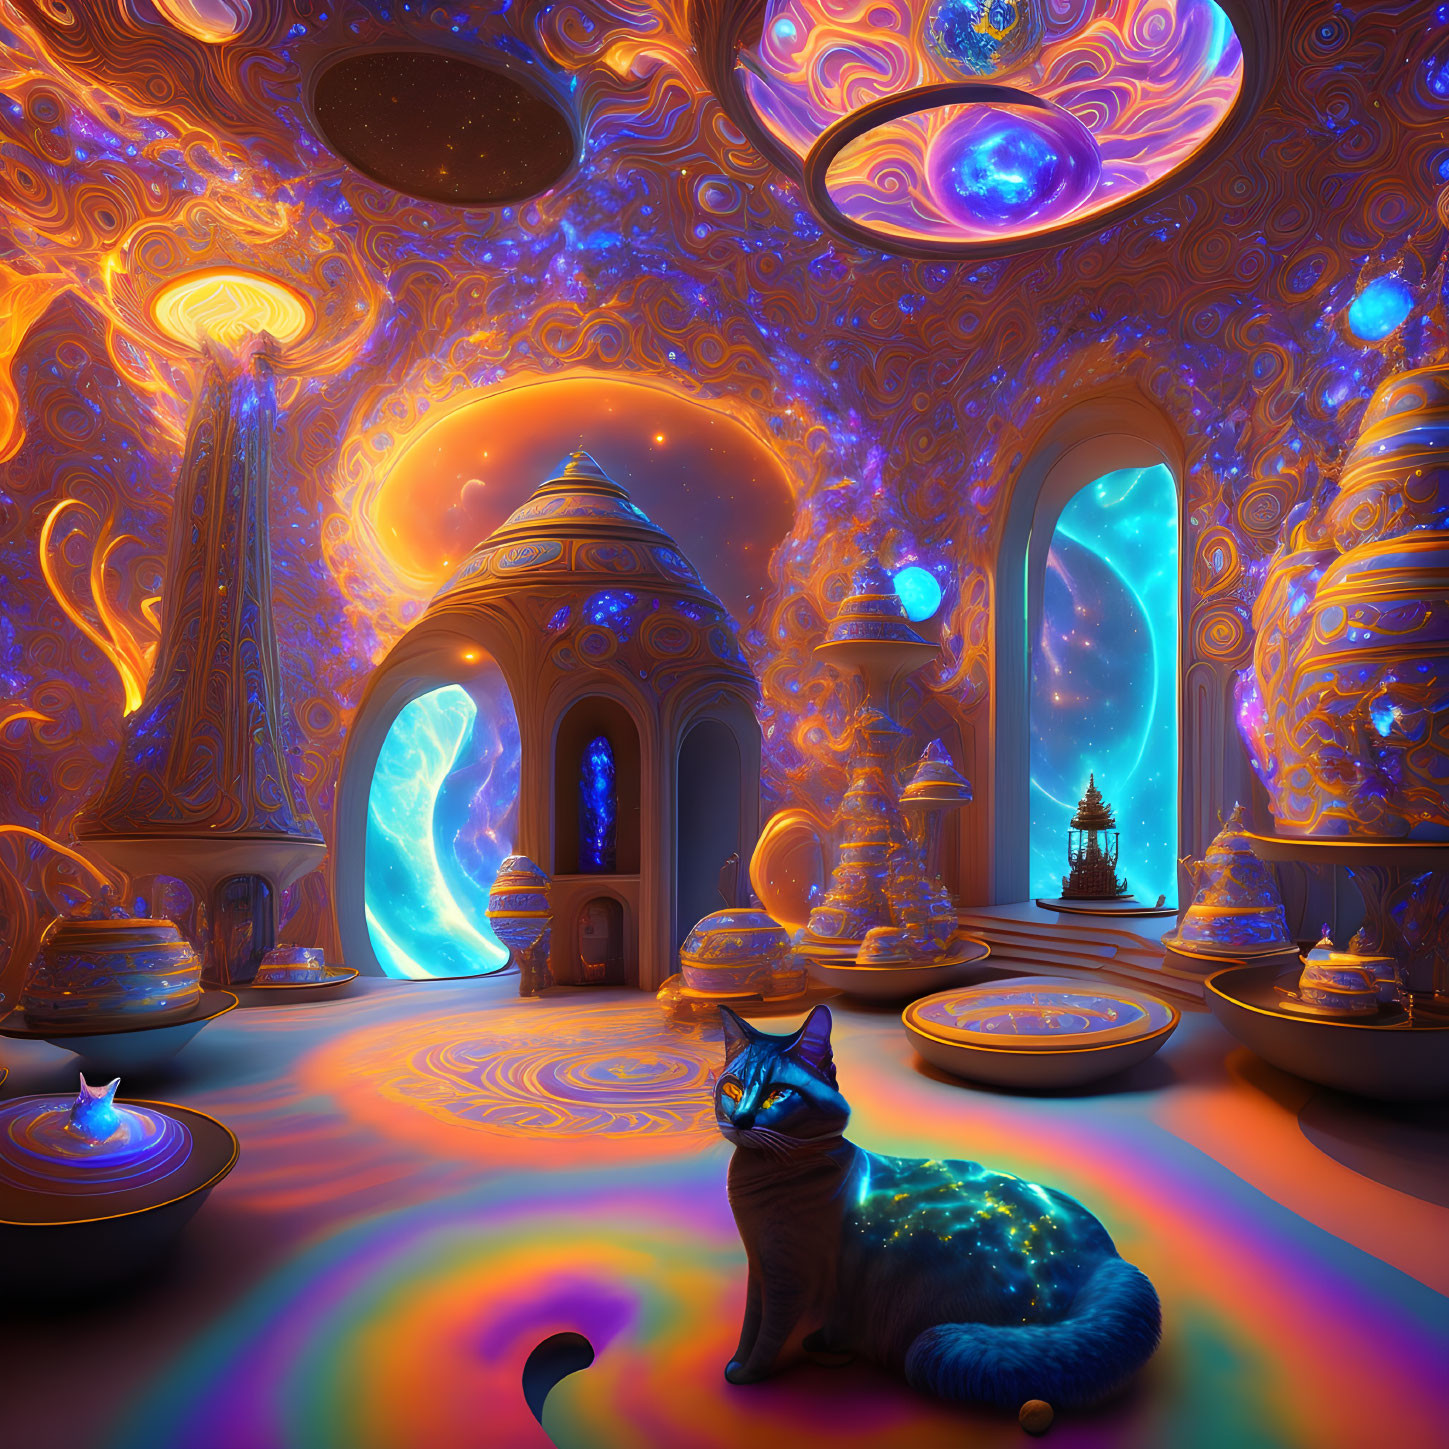 Cosmic interior with swirling patterns and celestial bodies